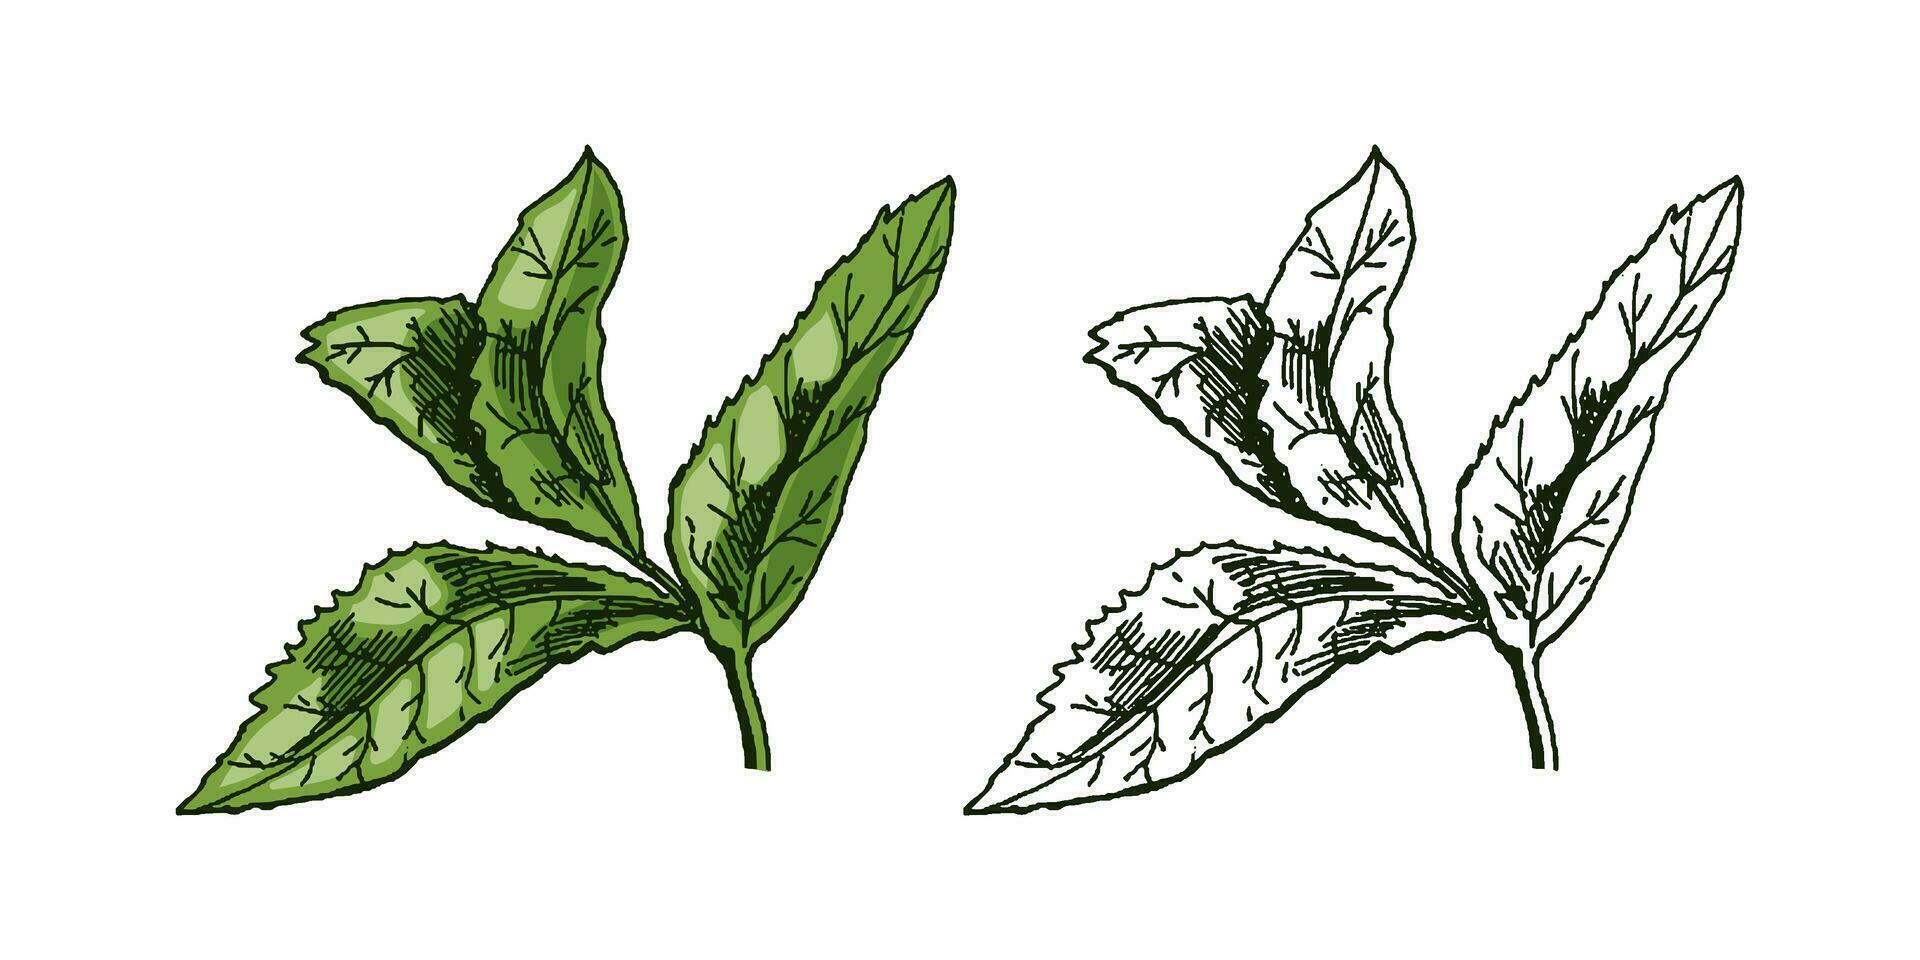 Organic food. Hand-drawn colored and monochrome vector sketch of mint leaves. Doodle vintage illustration. Decorations for the menu and labels. Engraved image.